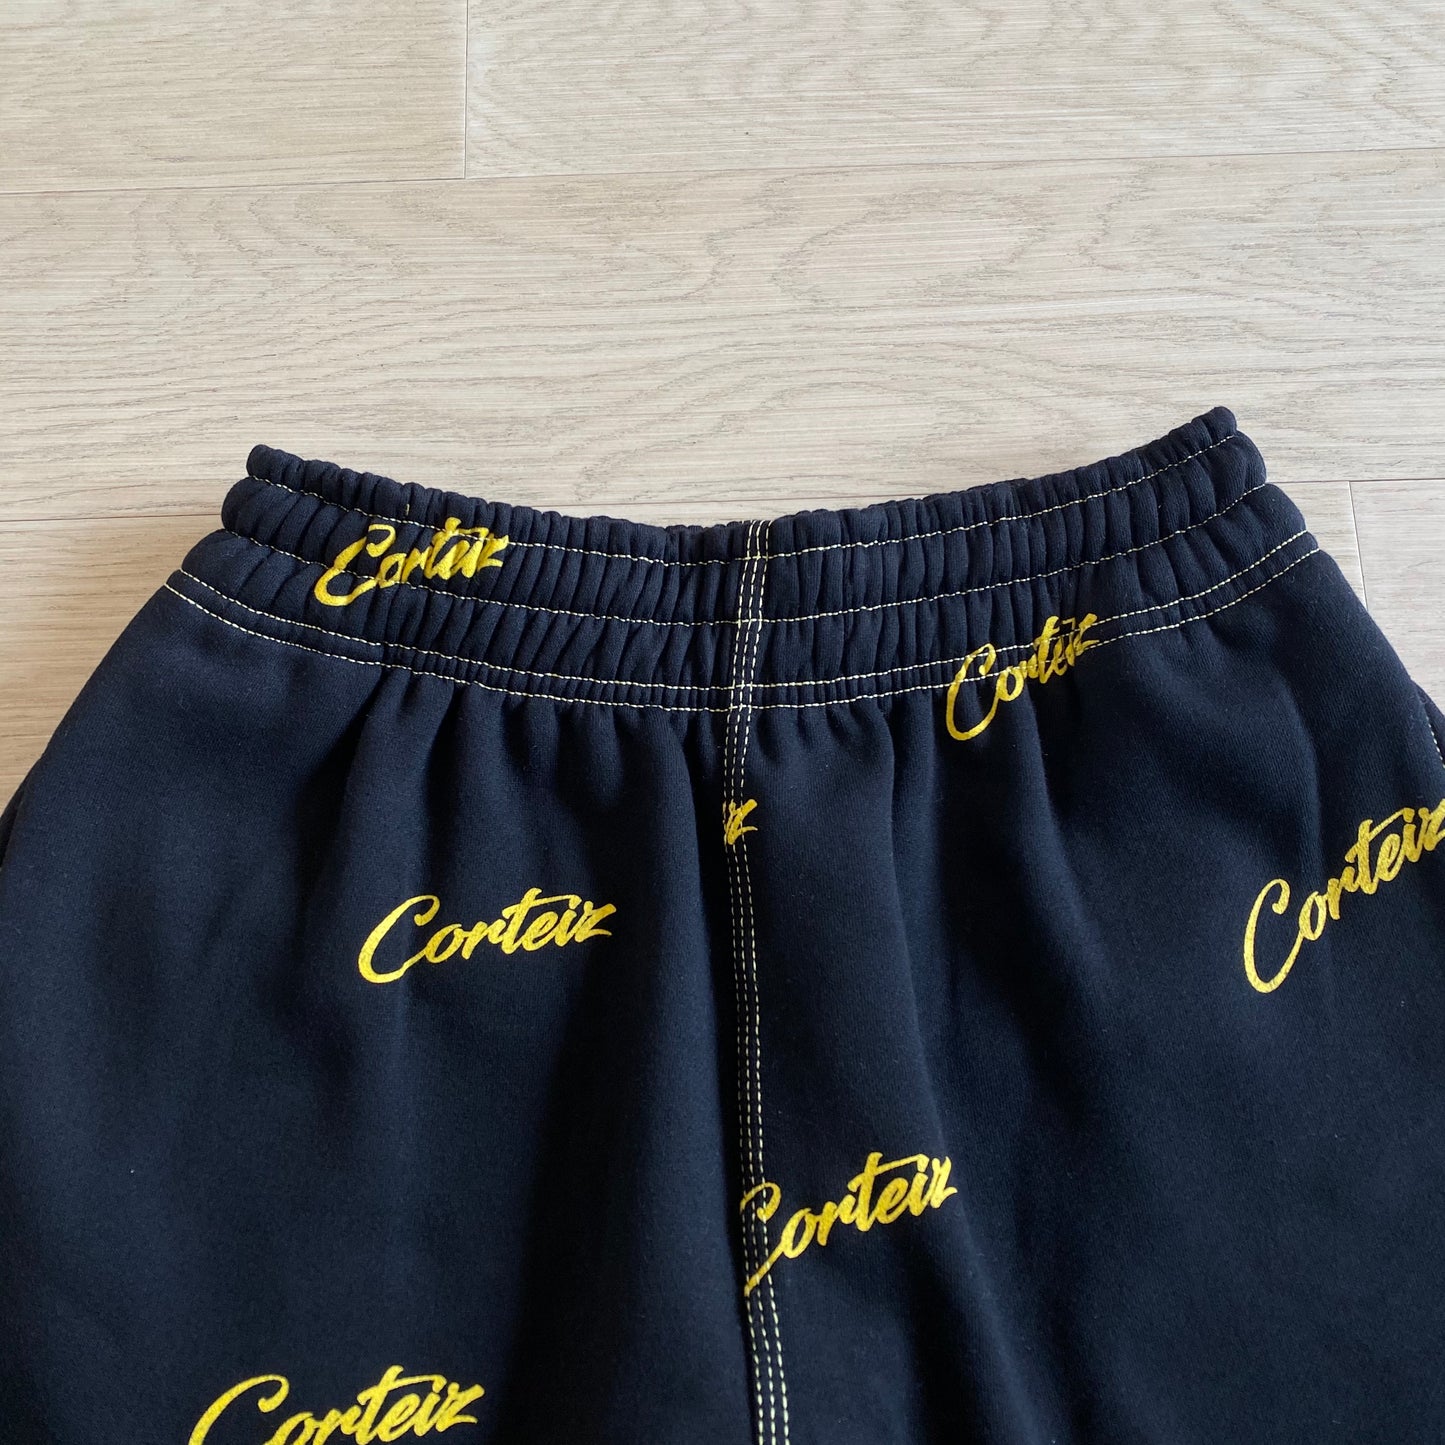 Corteiz embroidered joggers